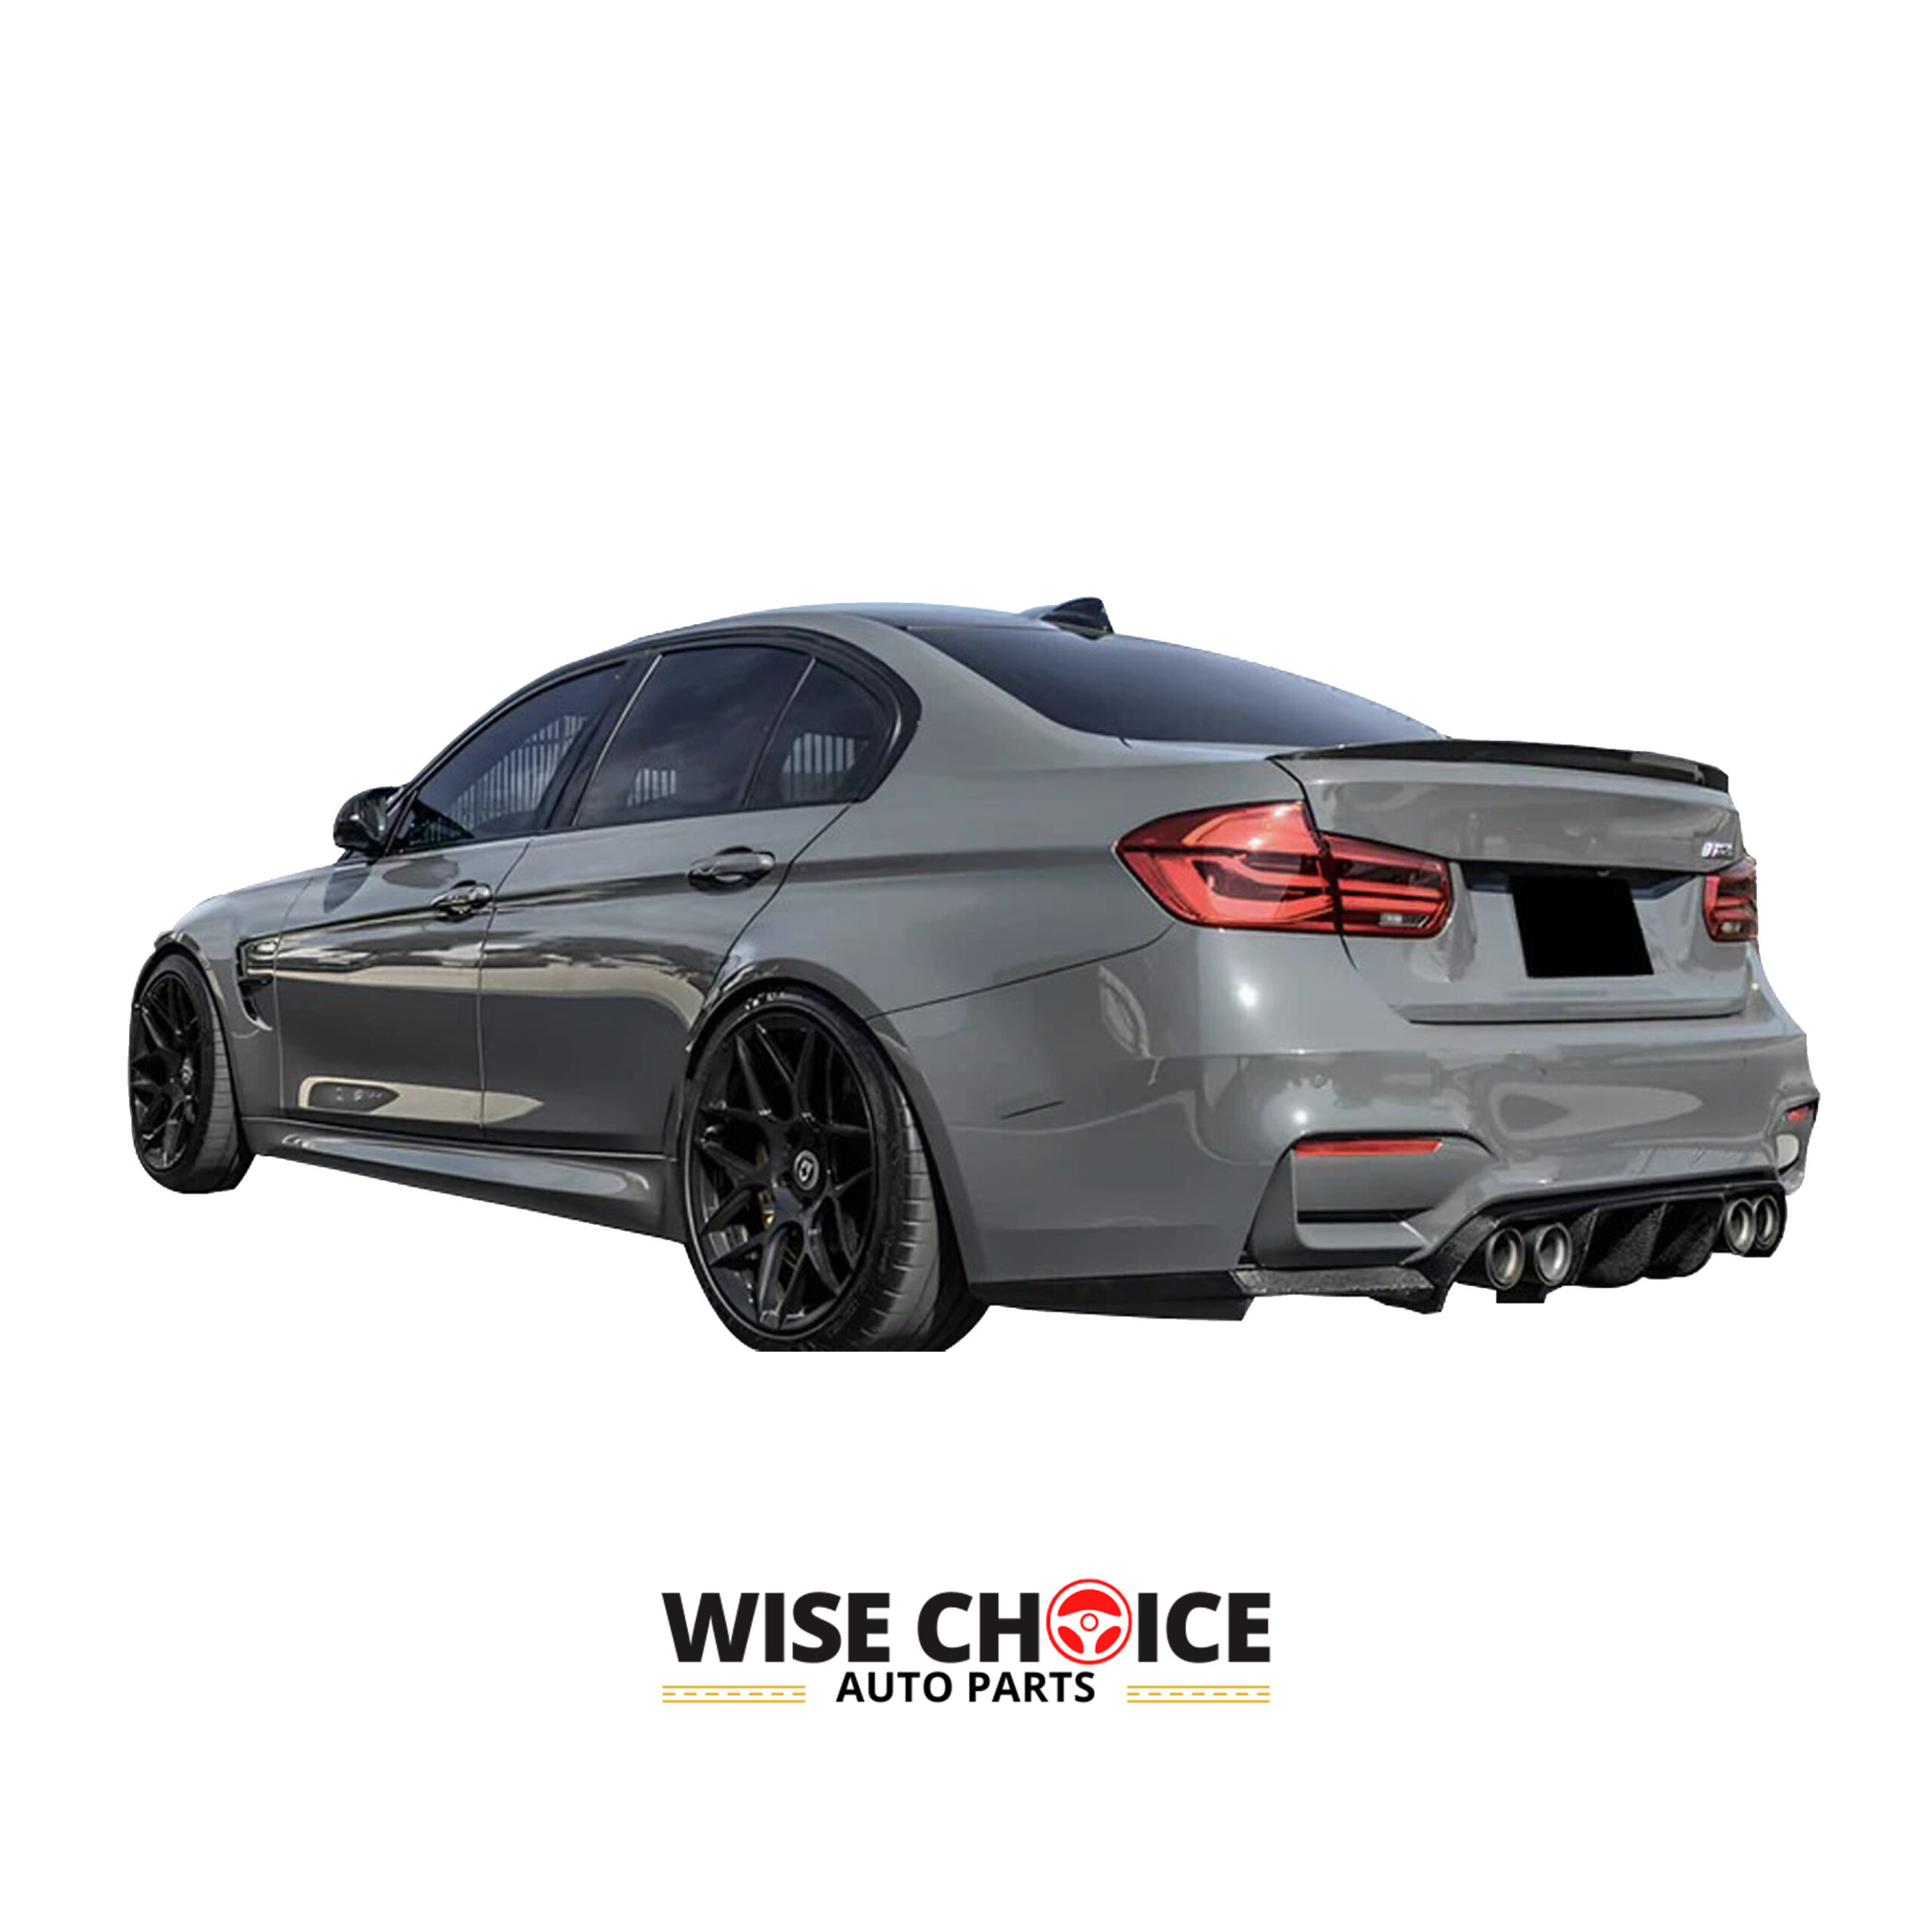 BMW F30 M3 Spoiler: High-Quality Carbon Trunk Spoiler for 2012-2018 Models